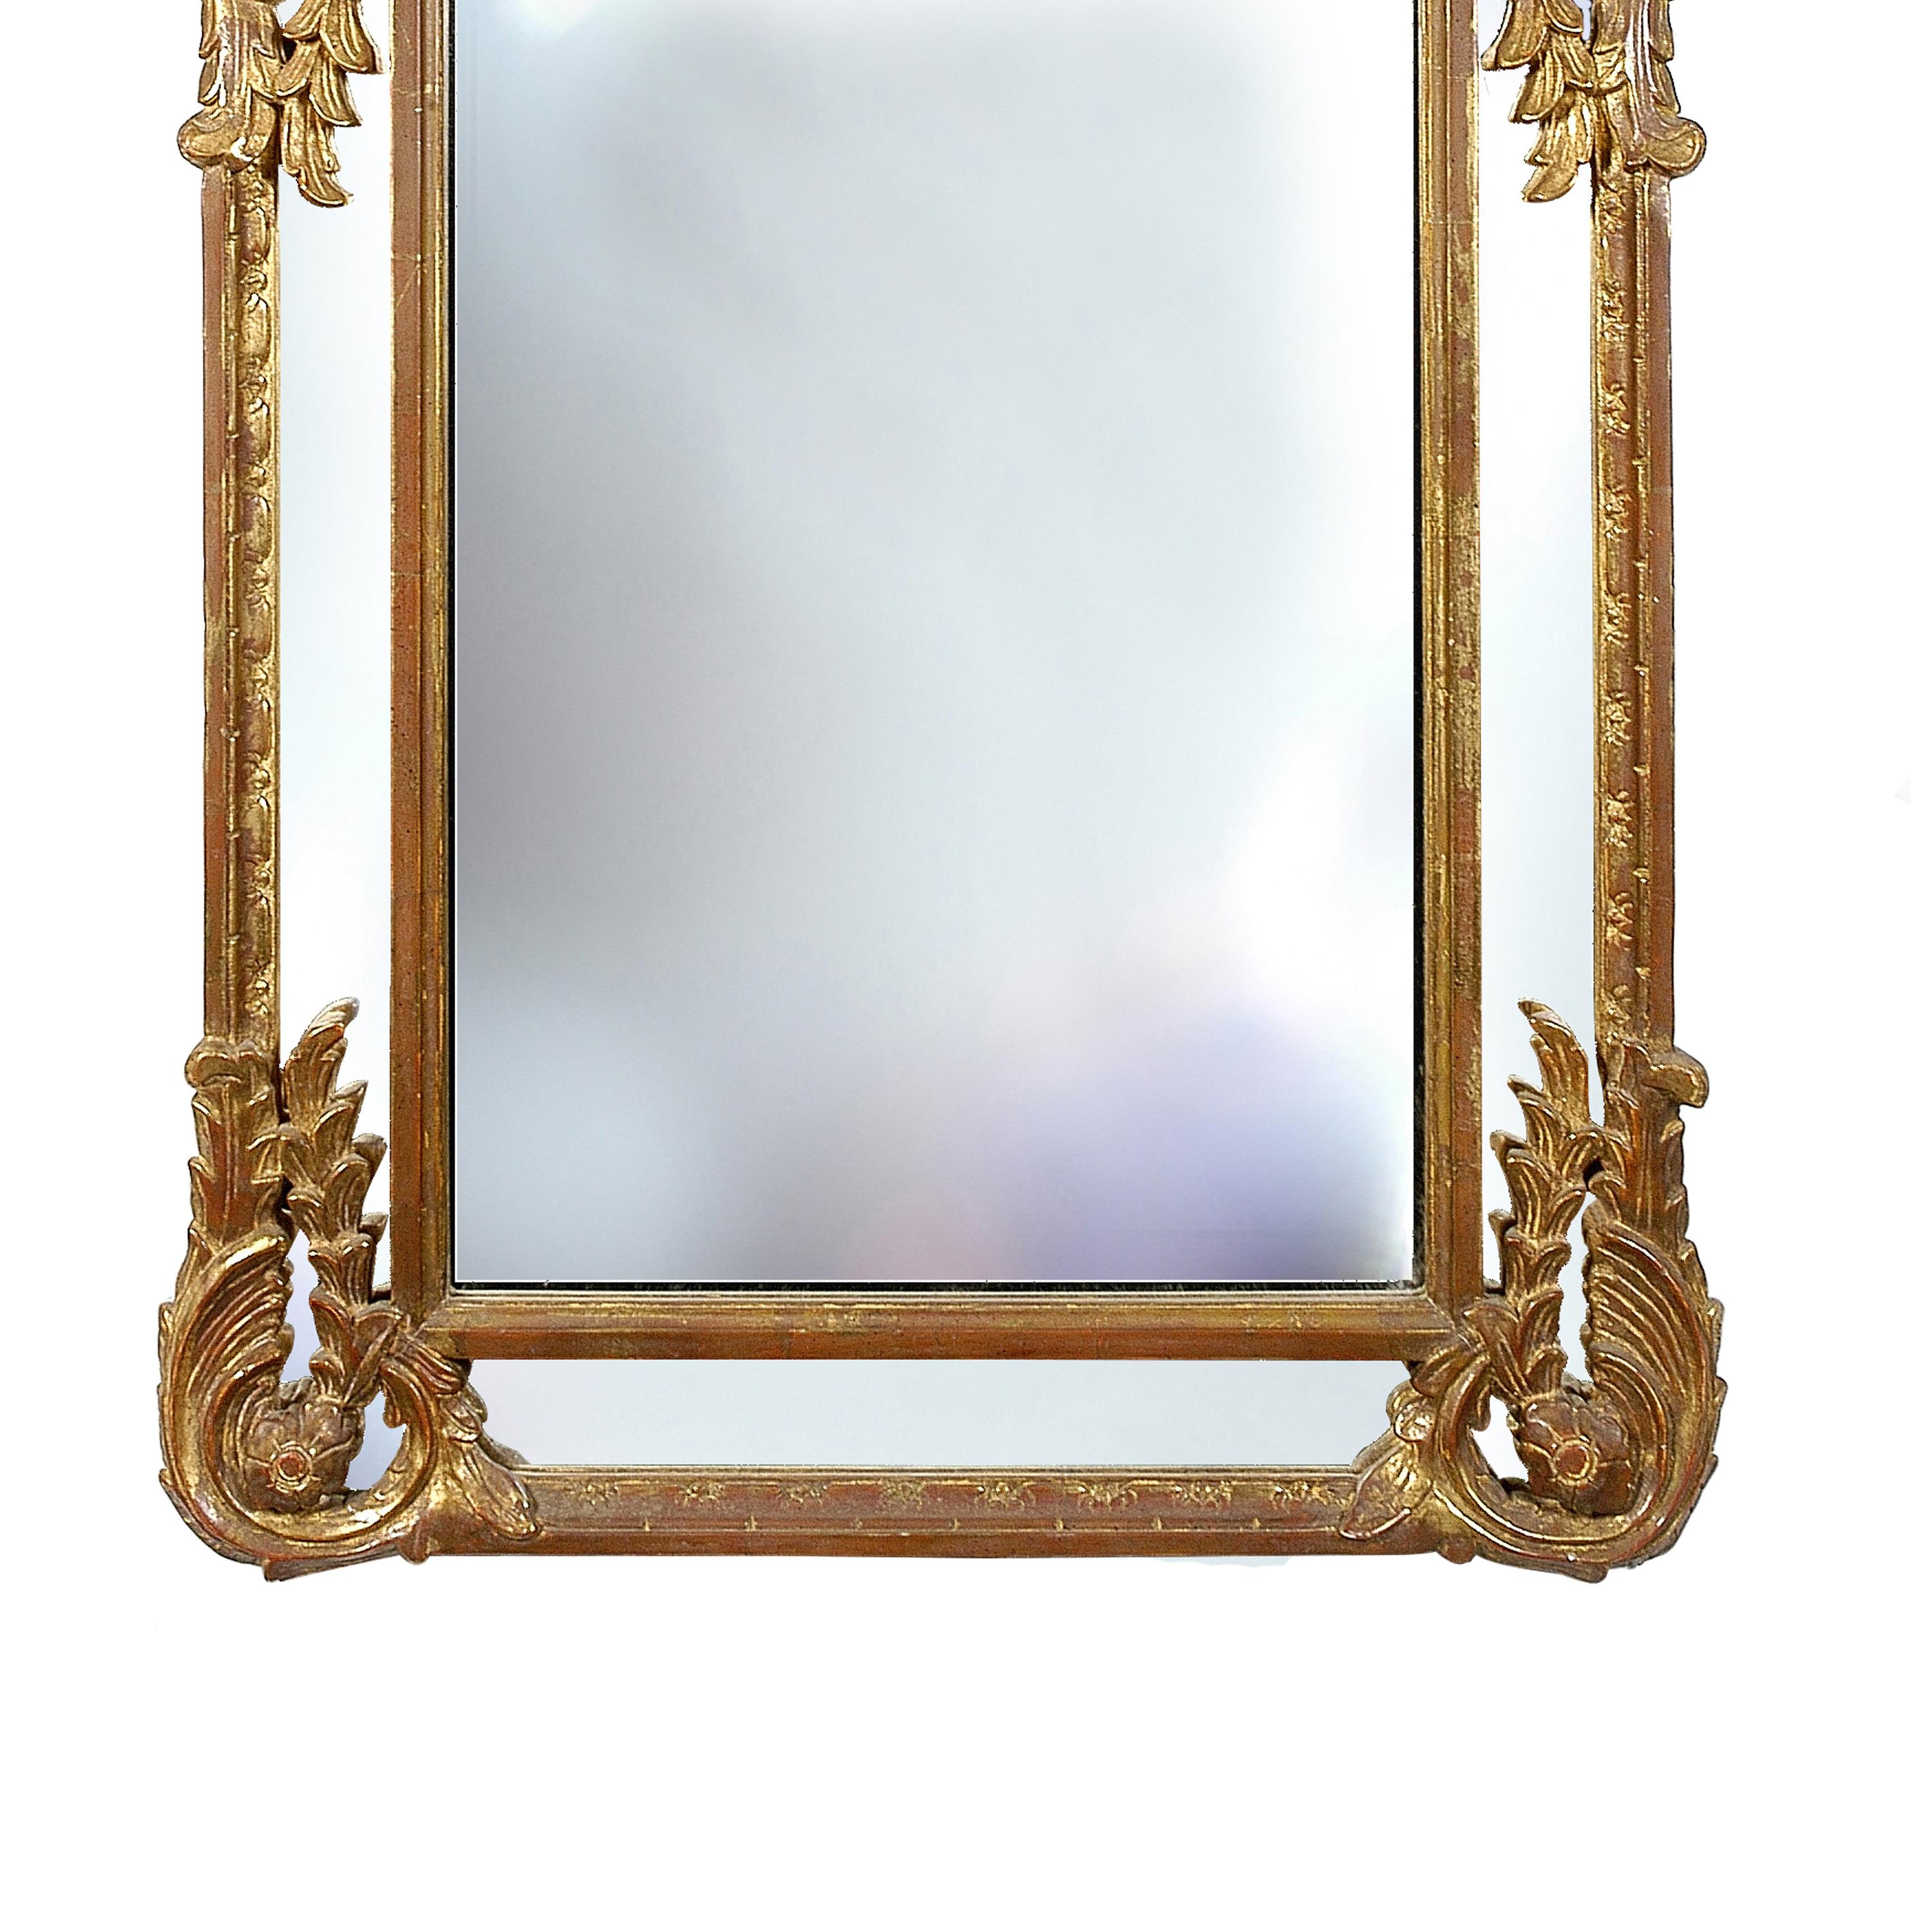 Spanish Neoclassical Regency Style Rectangular Gold Foil Hand Carved Wooden Mirror, 1970 For Sale